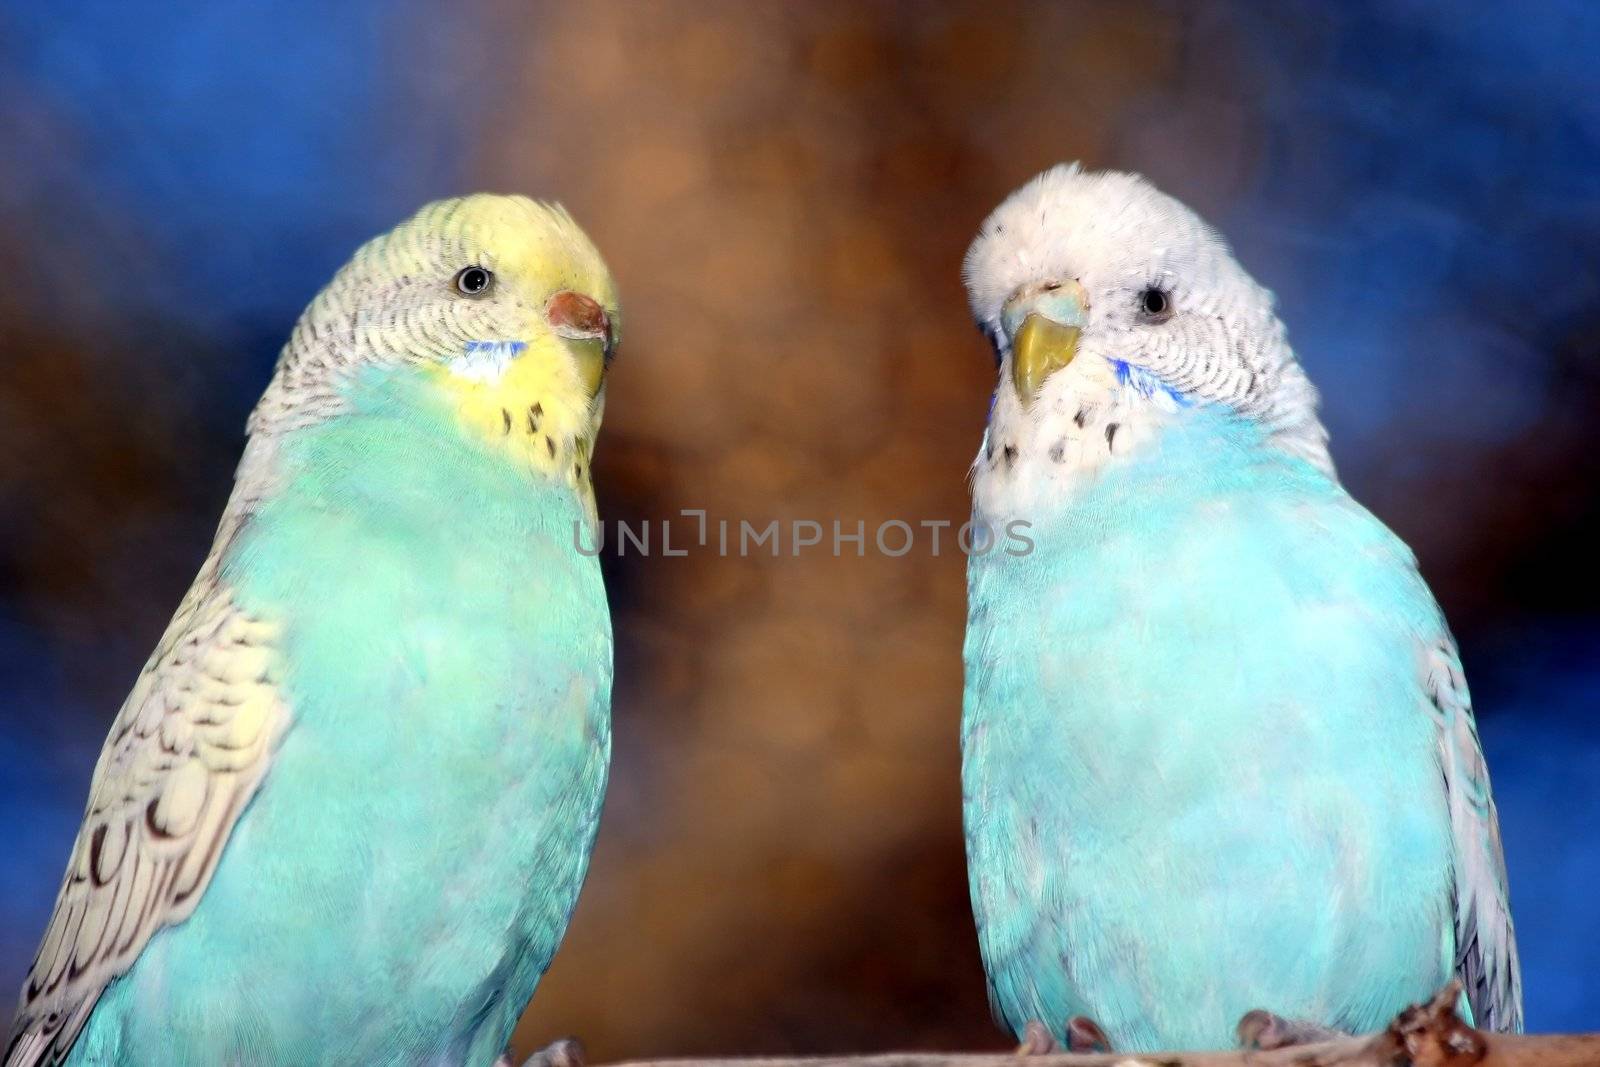 Pair of budgie parakeets sitting next to each other